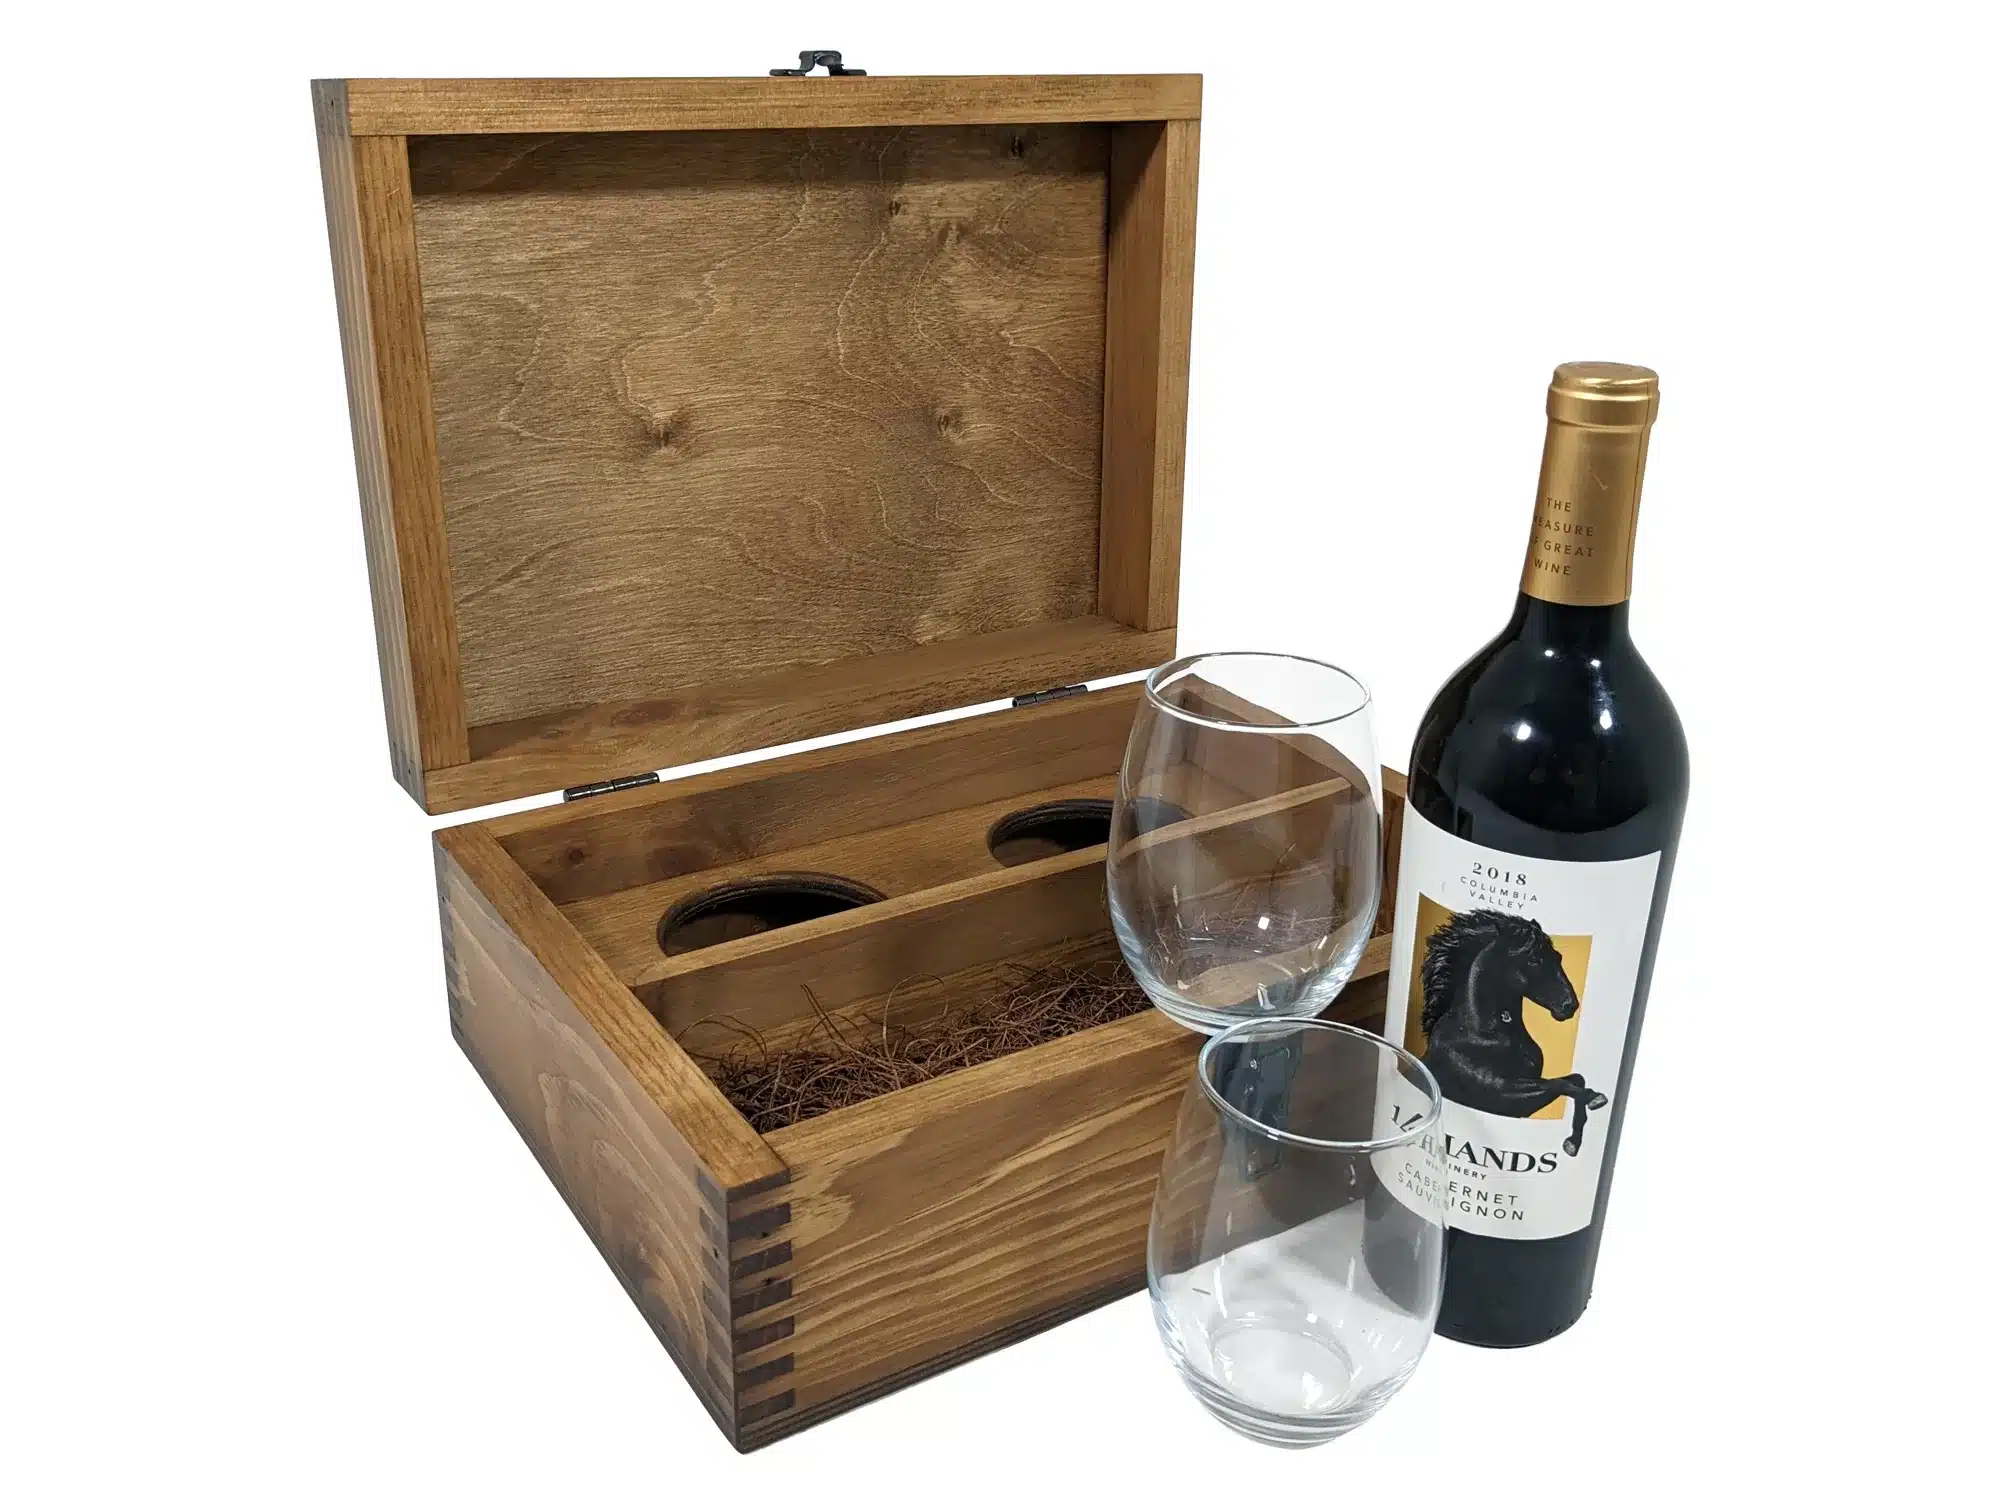 https://relicwood.com/wp-content/uploads/2020/10/Wine-Gift-Set-with-Hypoallergenic-Dust-Free-packing-1-1-jpg.webp